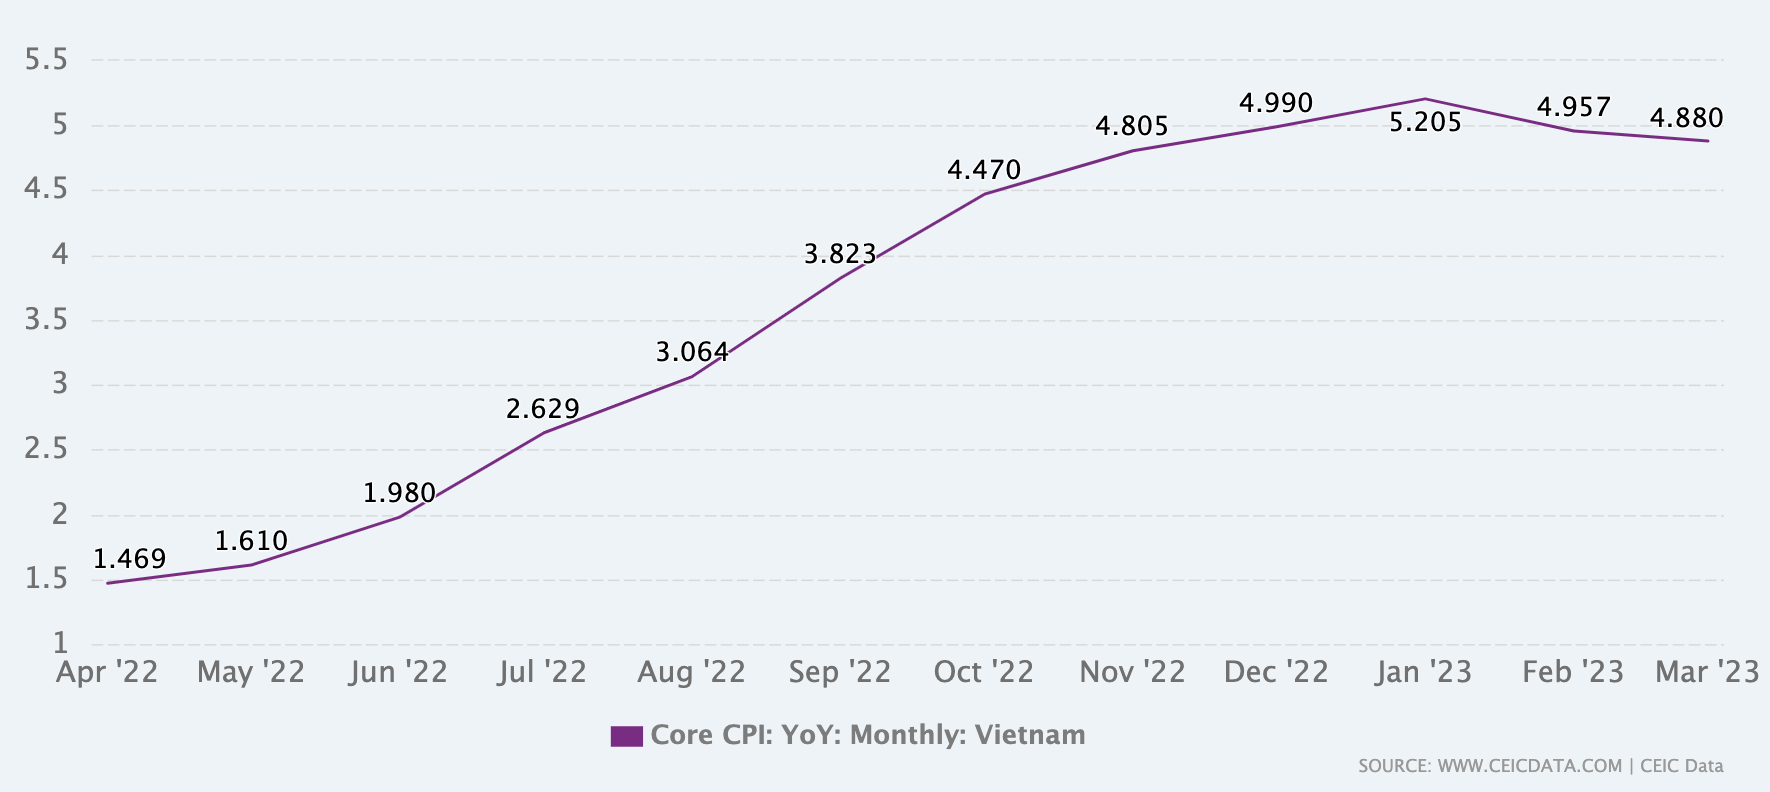 Rising inflation trend graph of Vietnam from April 2022 to March 2023.